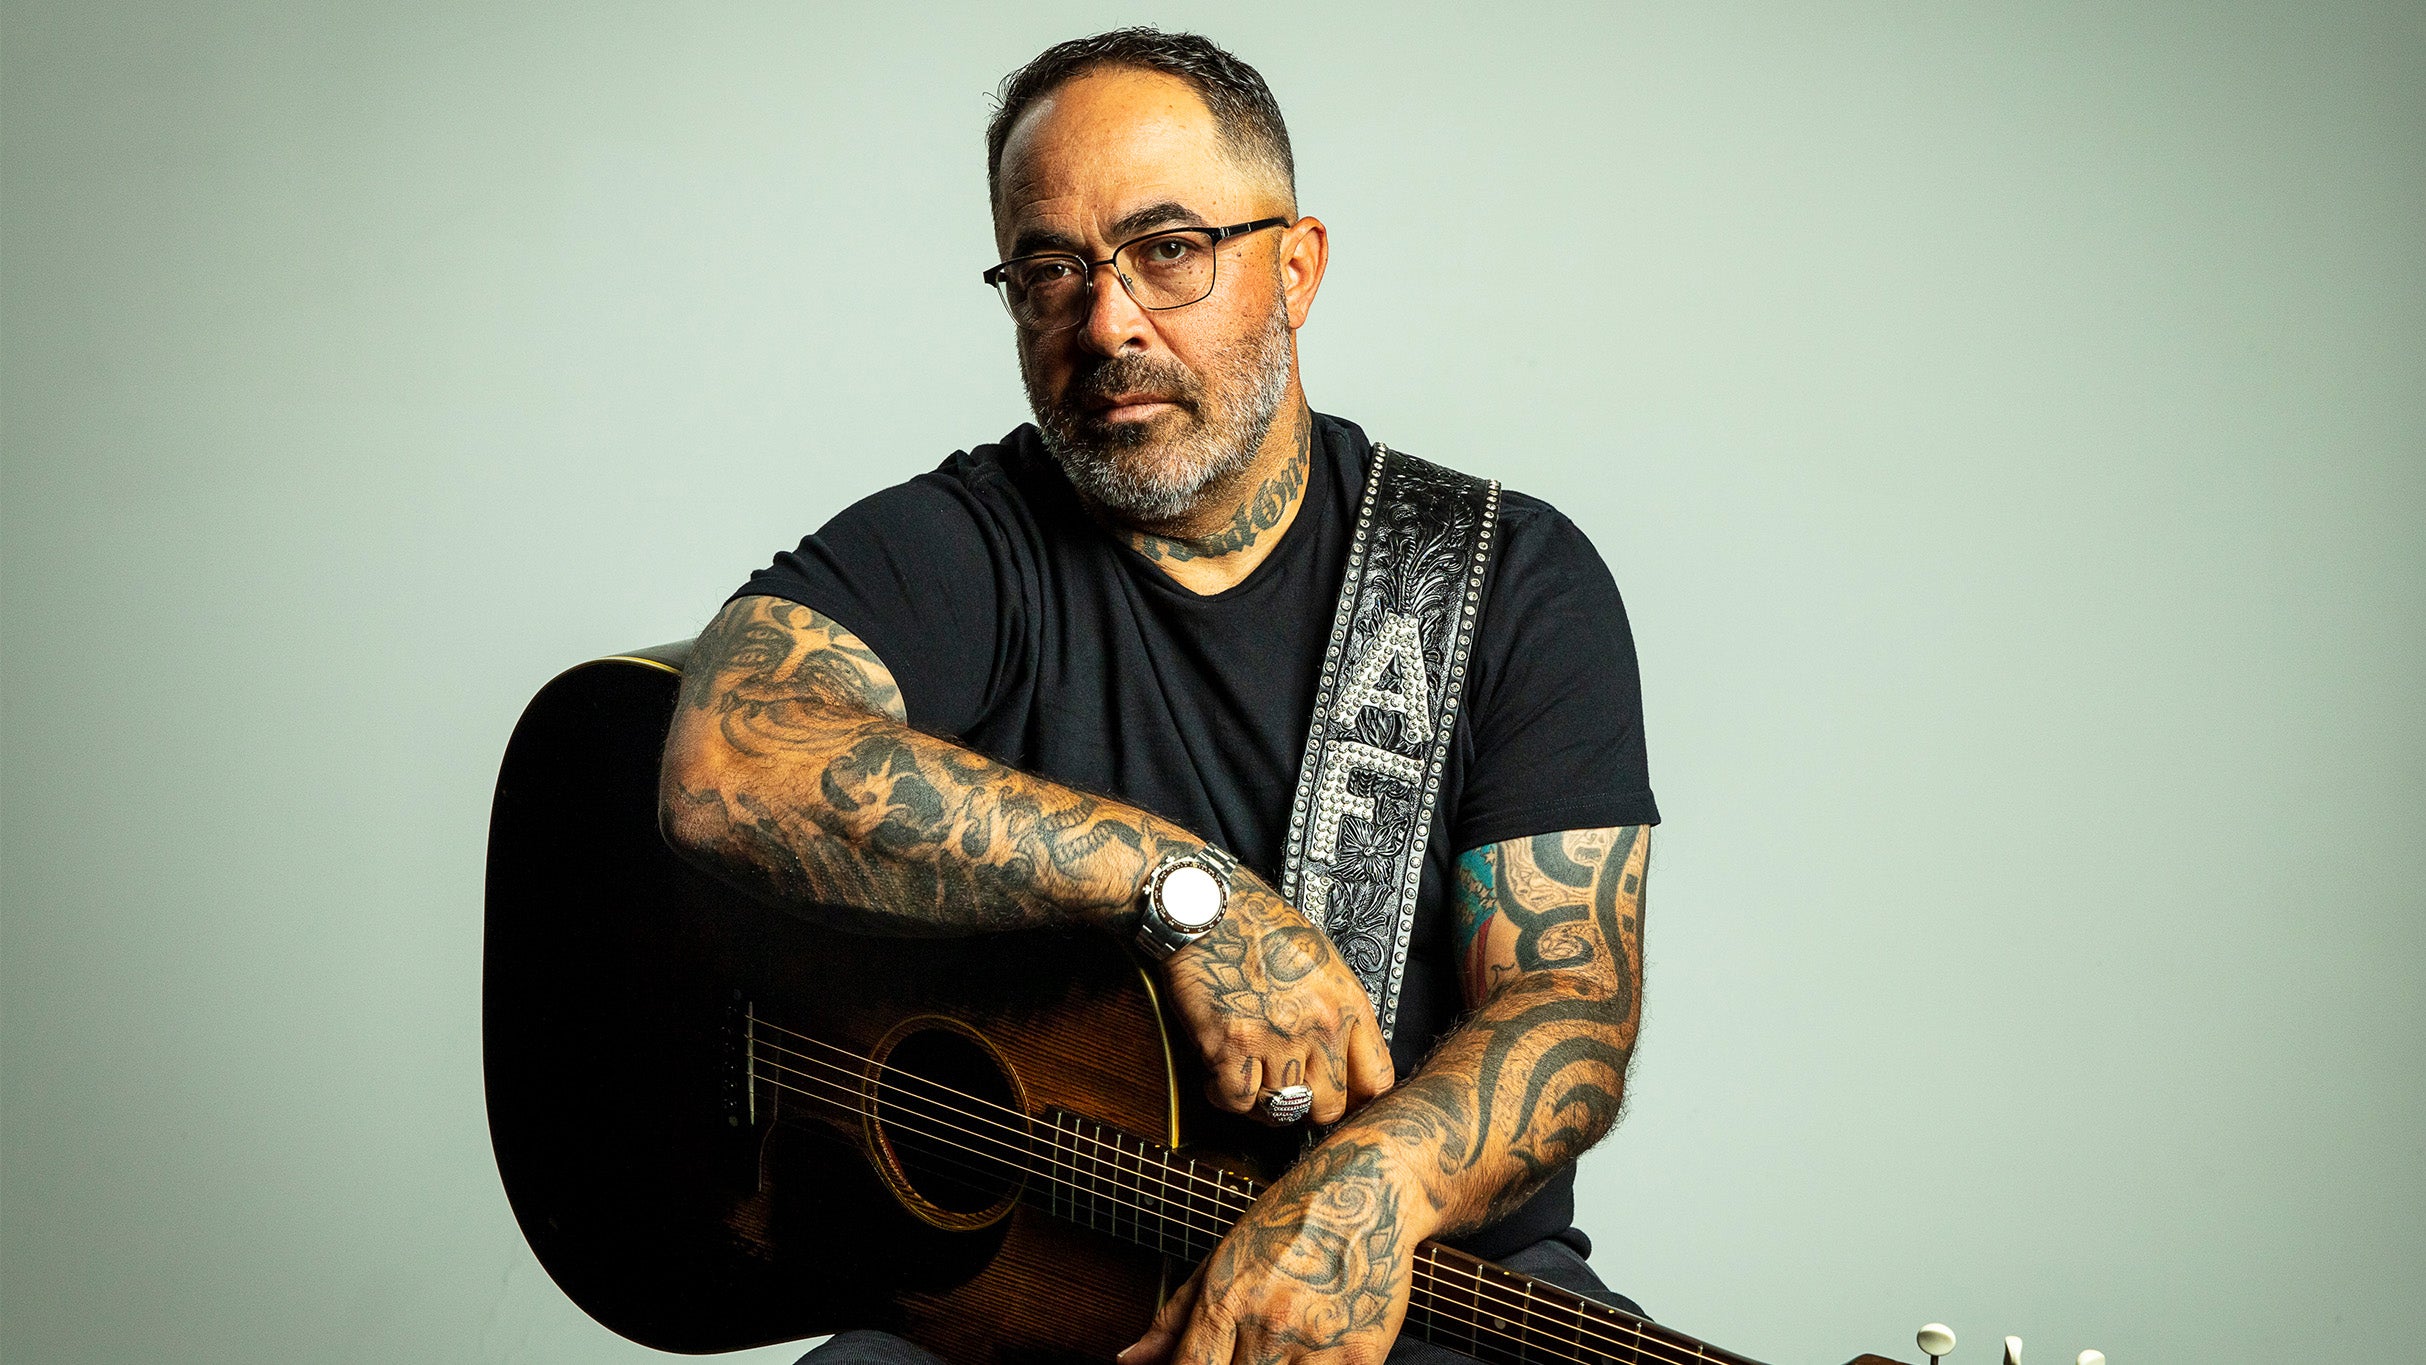 Aaron Lewis in Scottsdale  promo photo for Ticketmaster Royalty presale offer code